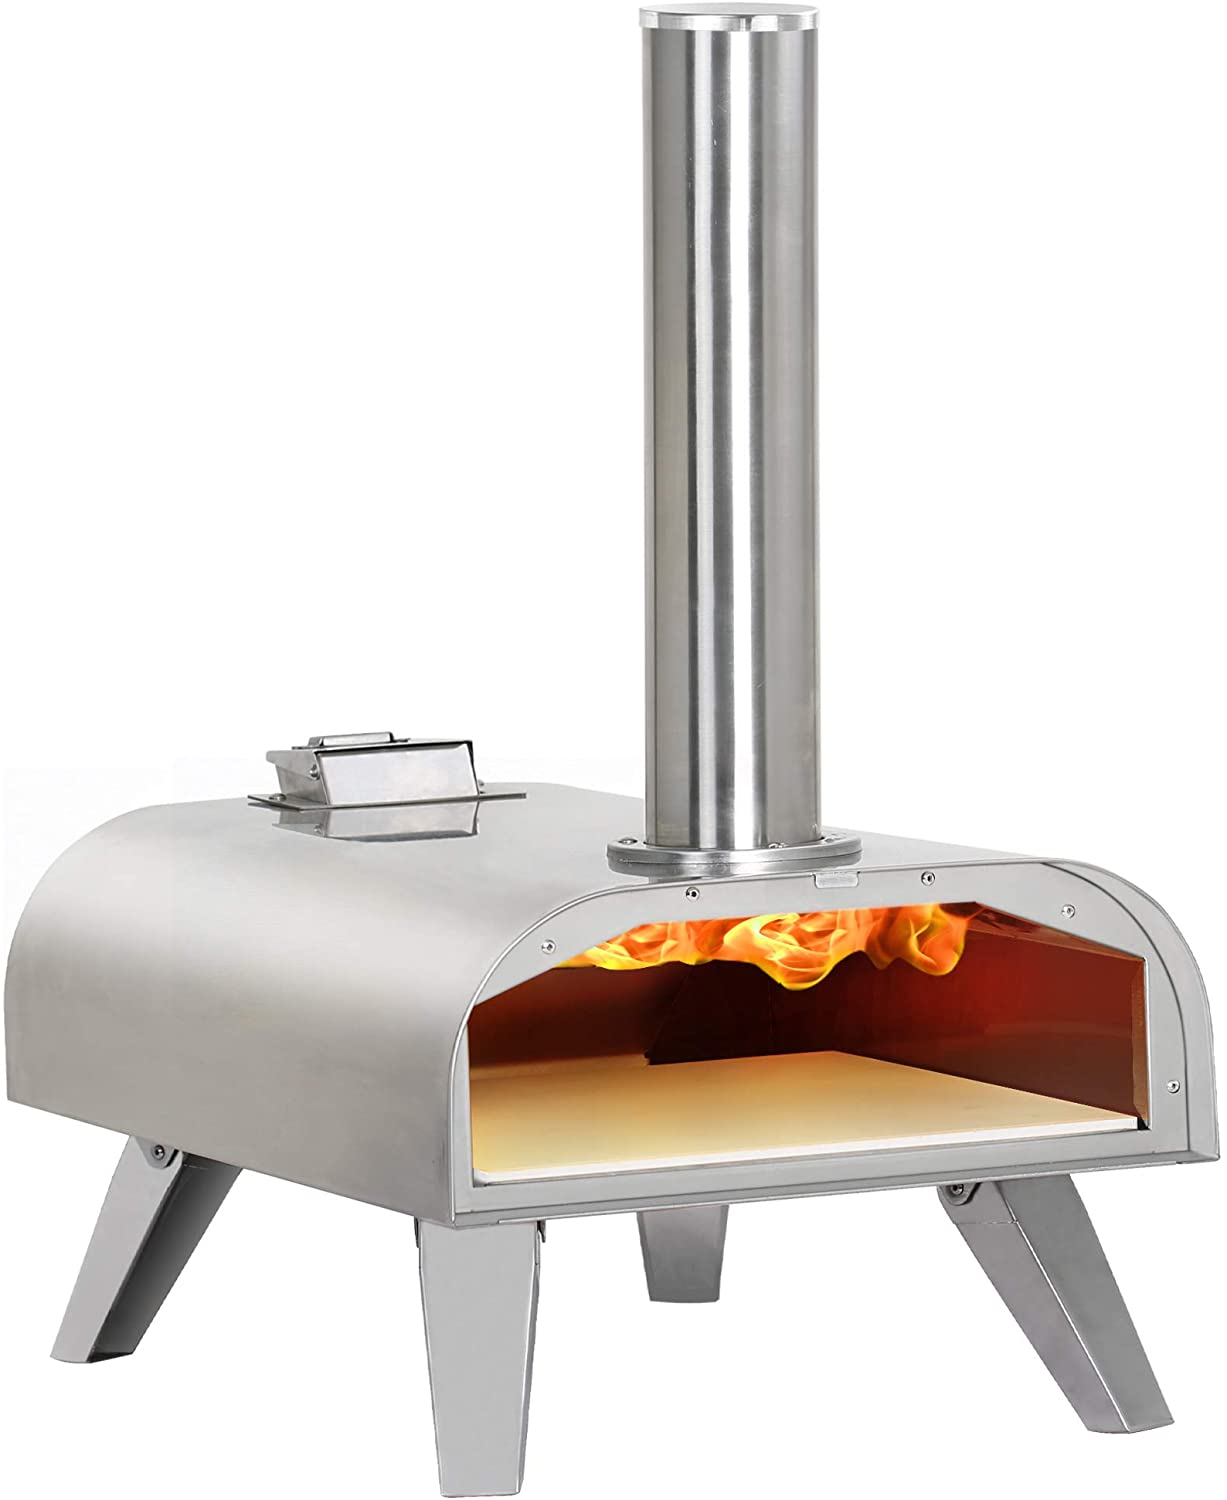 BIG HORN OUTDOORS 12 Inch Wood Pellet Burning Pizza Oven